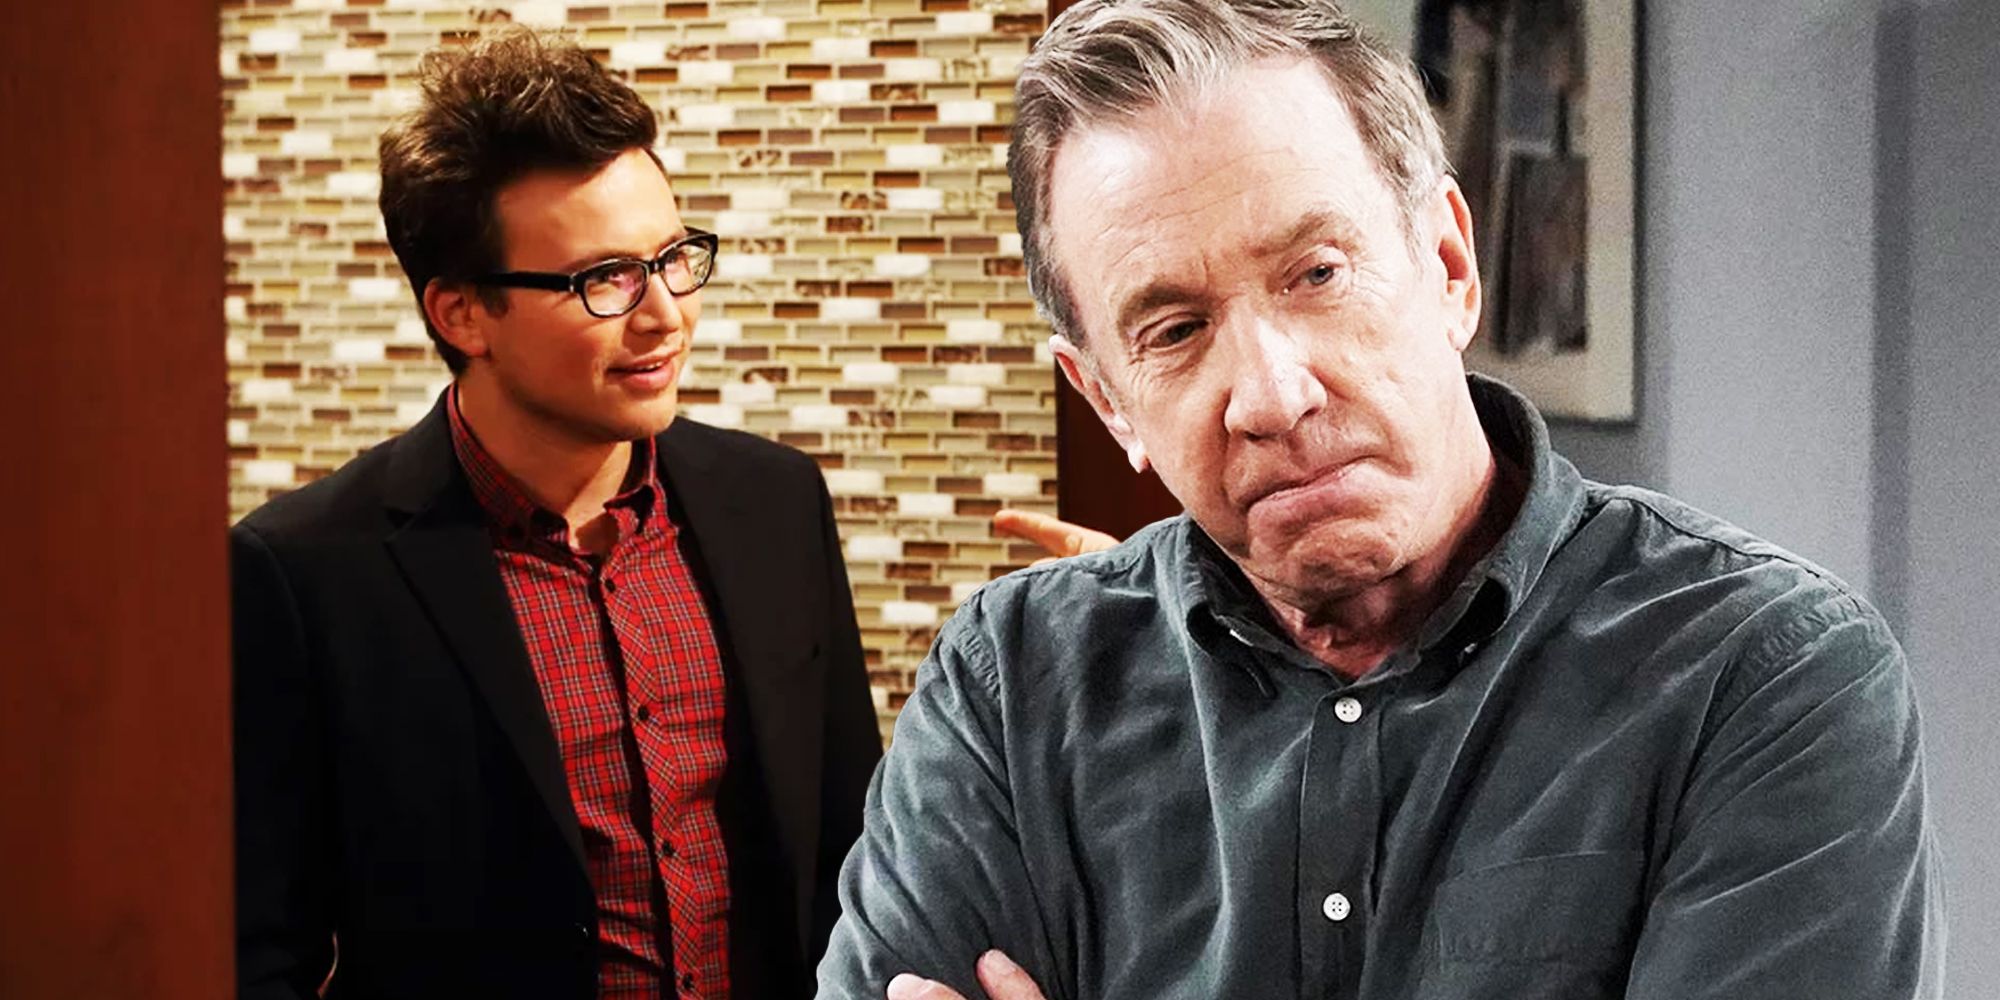 Tim Allen and Jonathan Taylor Thomas in Last Man Standing